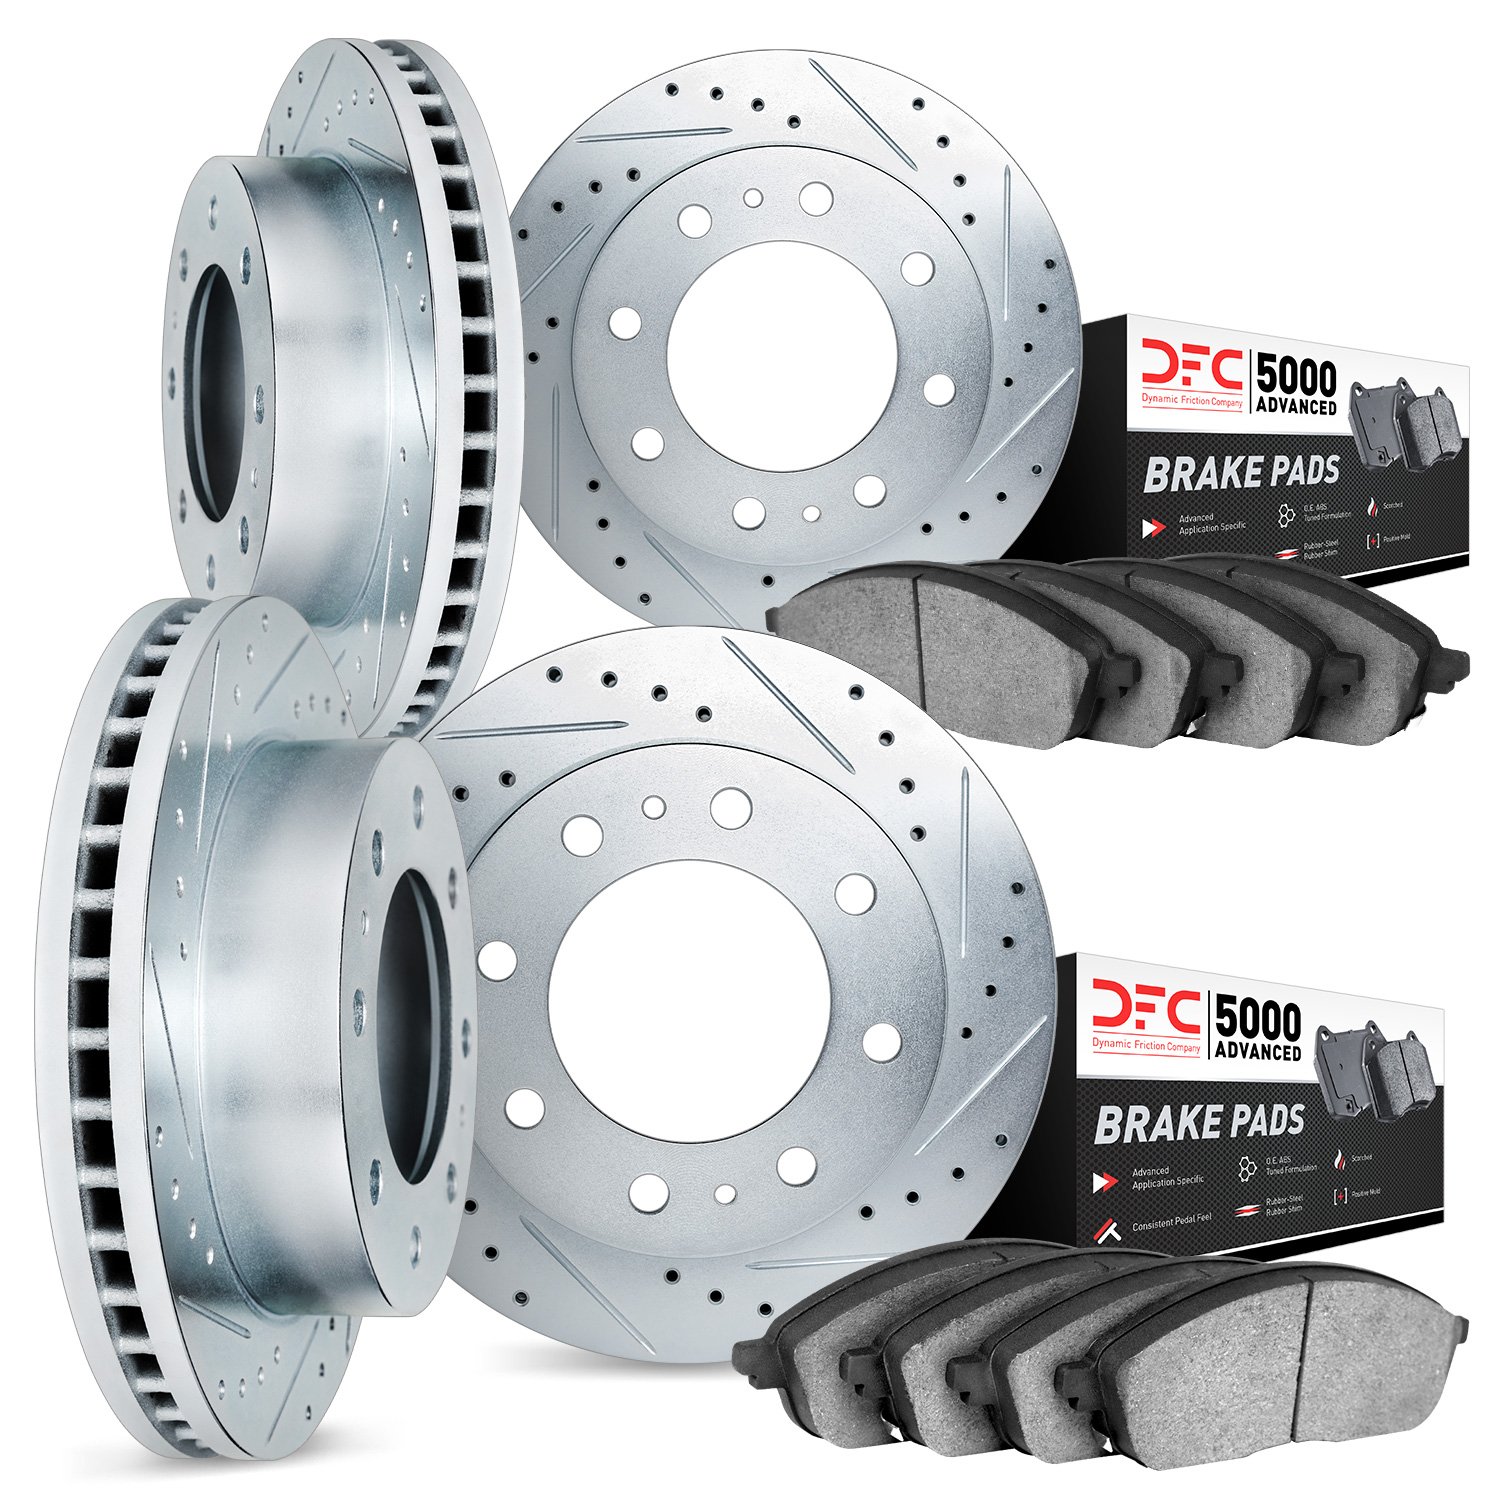 7504-48012 Drilled/Slotted Brake Rotors w/5000 Advanced Brake Pads Kit [Silver], 2005-2005 GM, Position: Front and Rear